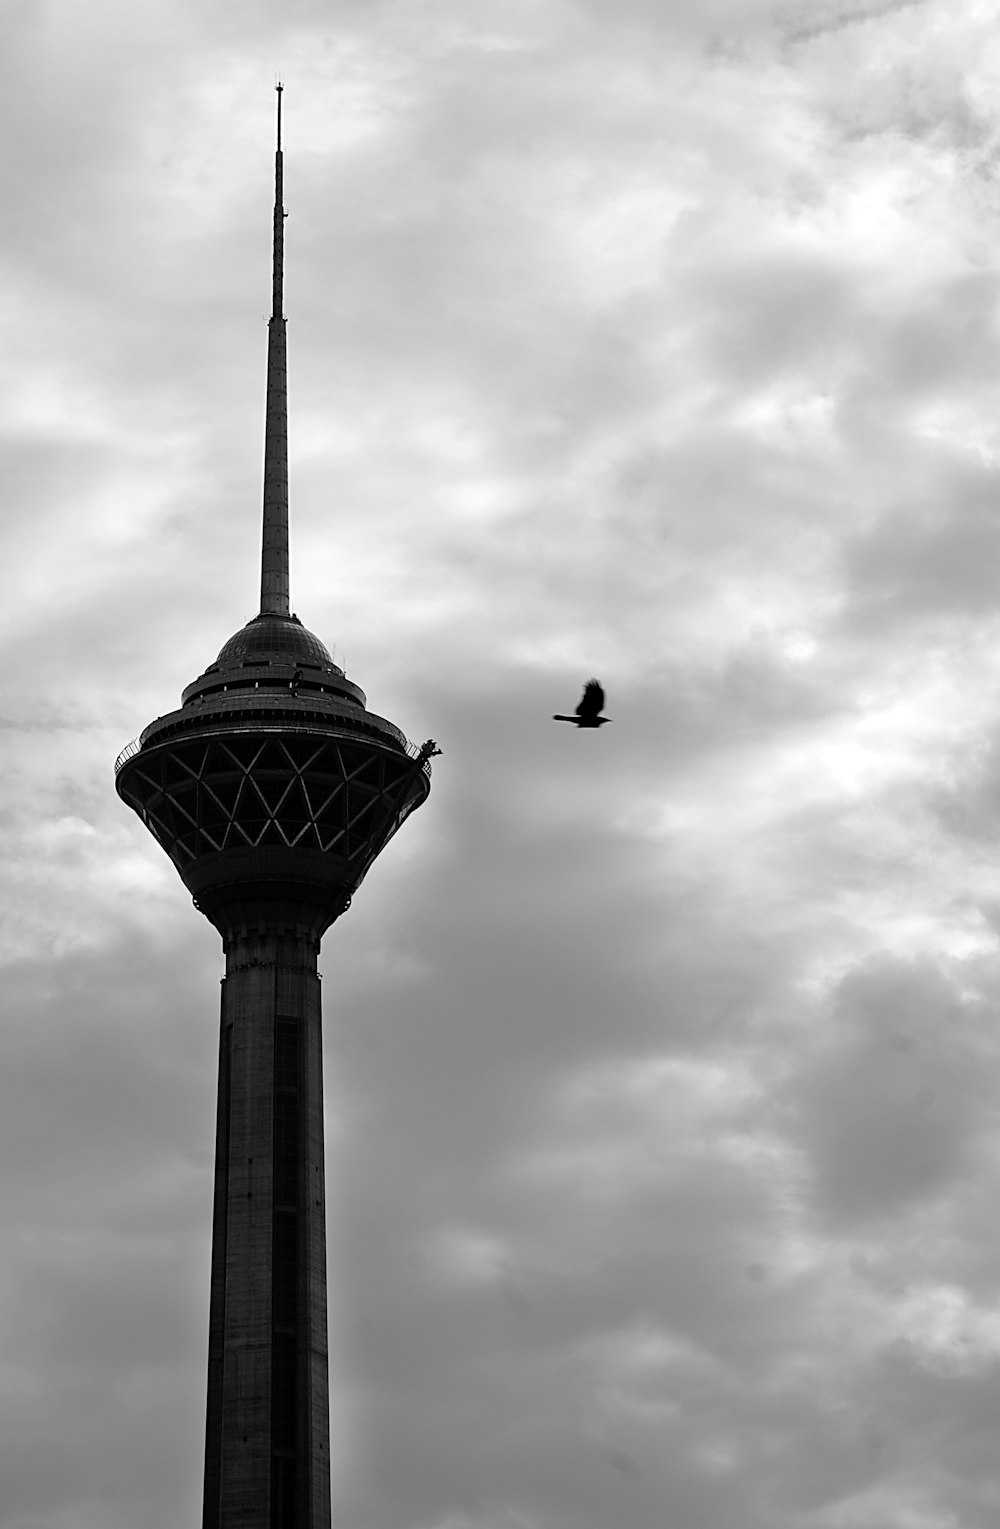 grayscale photo of bird in flight towards tower under cloudy sky